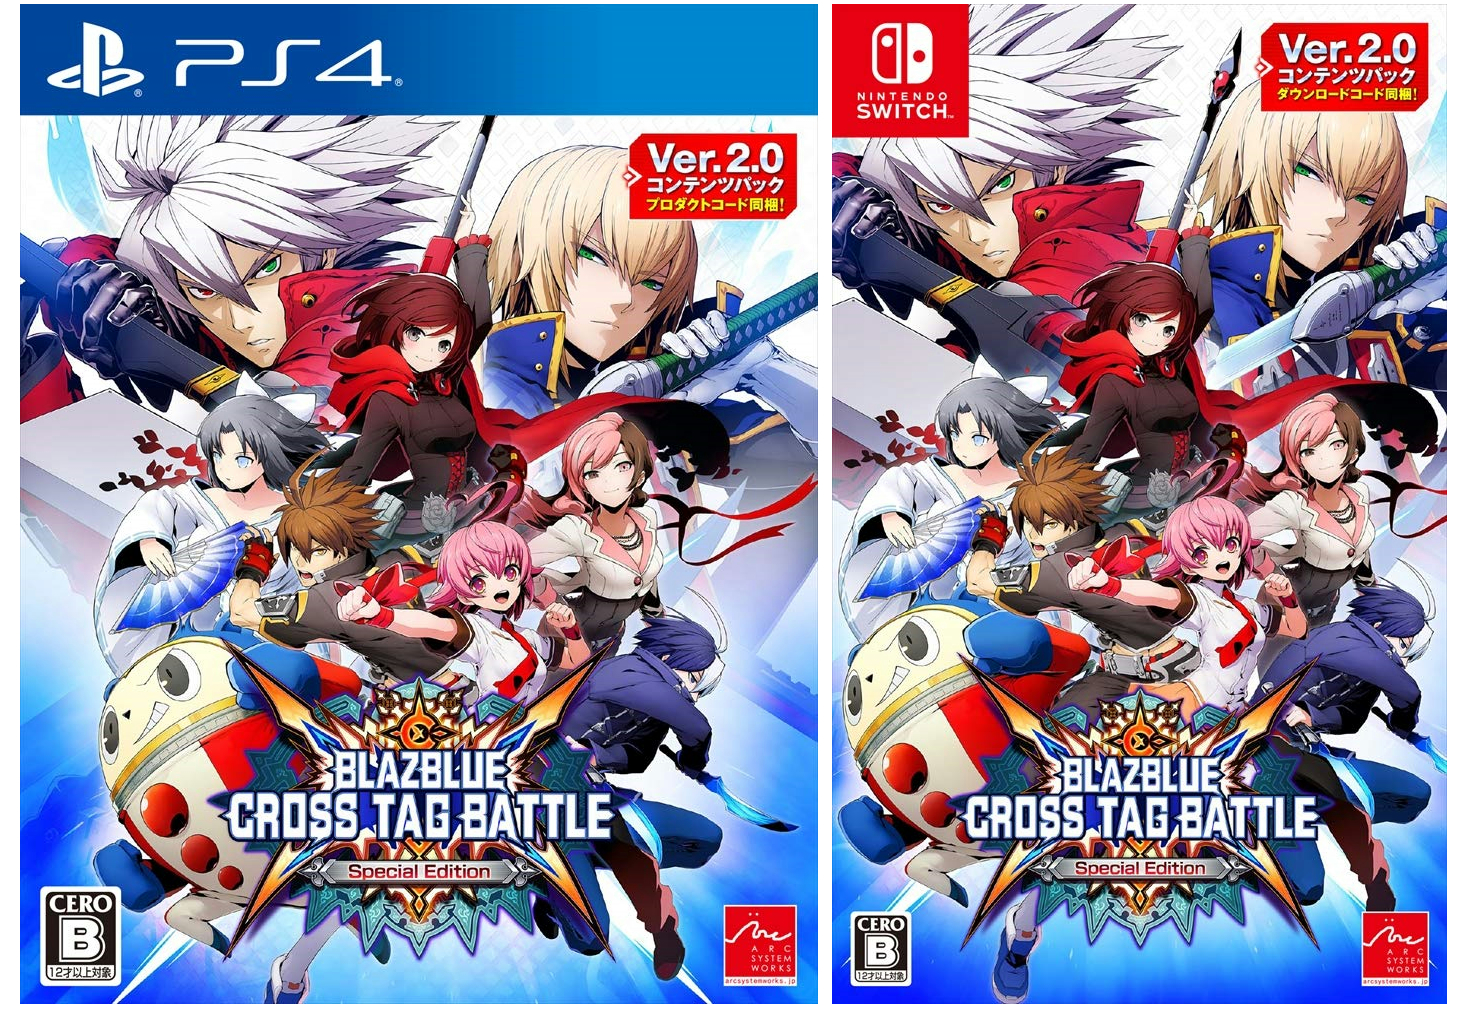 Blazblue Cross Tag Battle Special Edition のボックスアートが公開